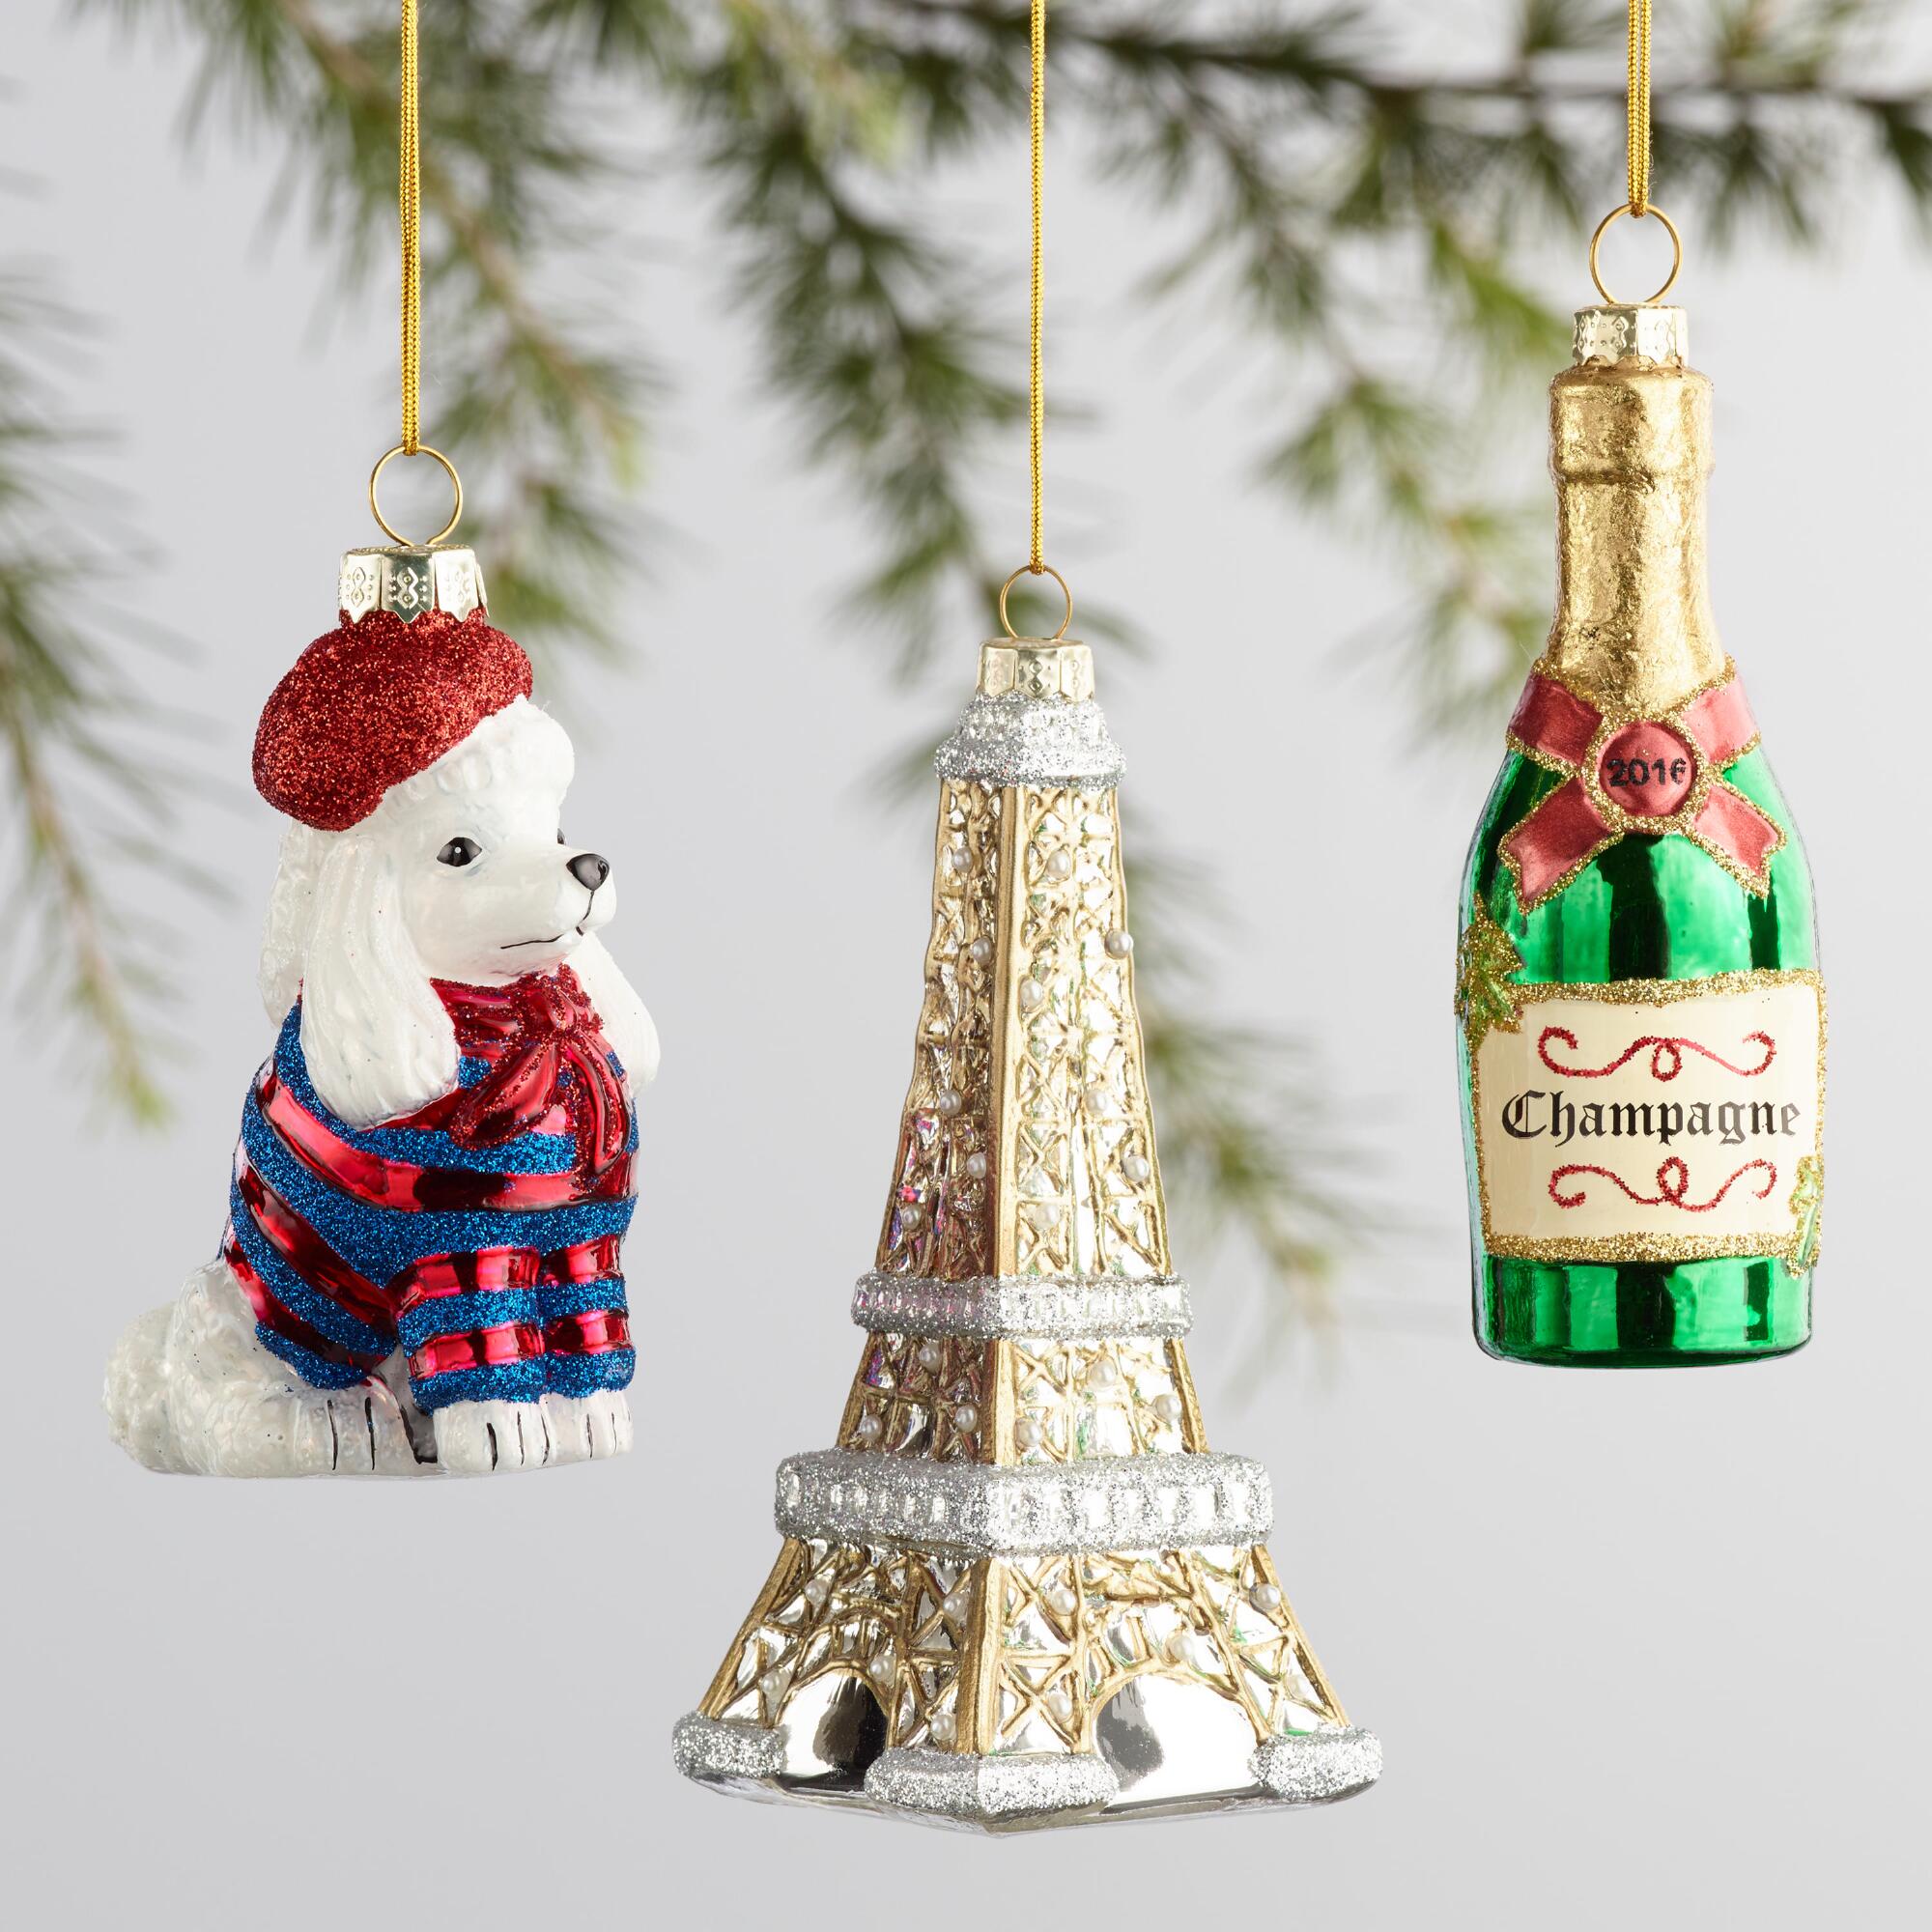 champagne-eiffel-tower-poodle-ornaments